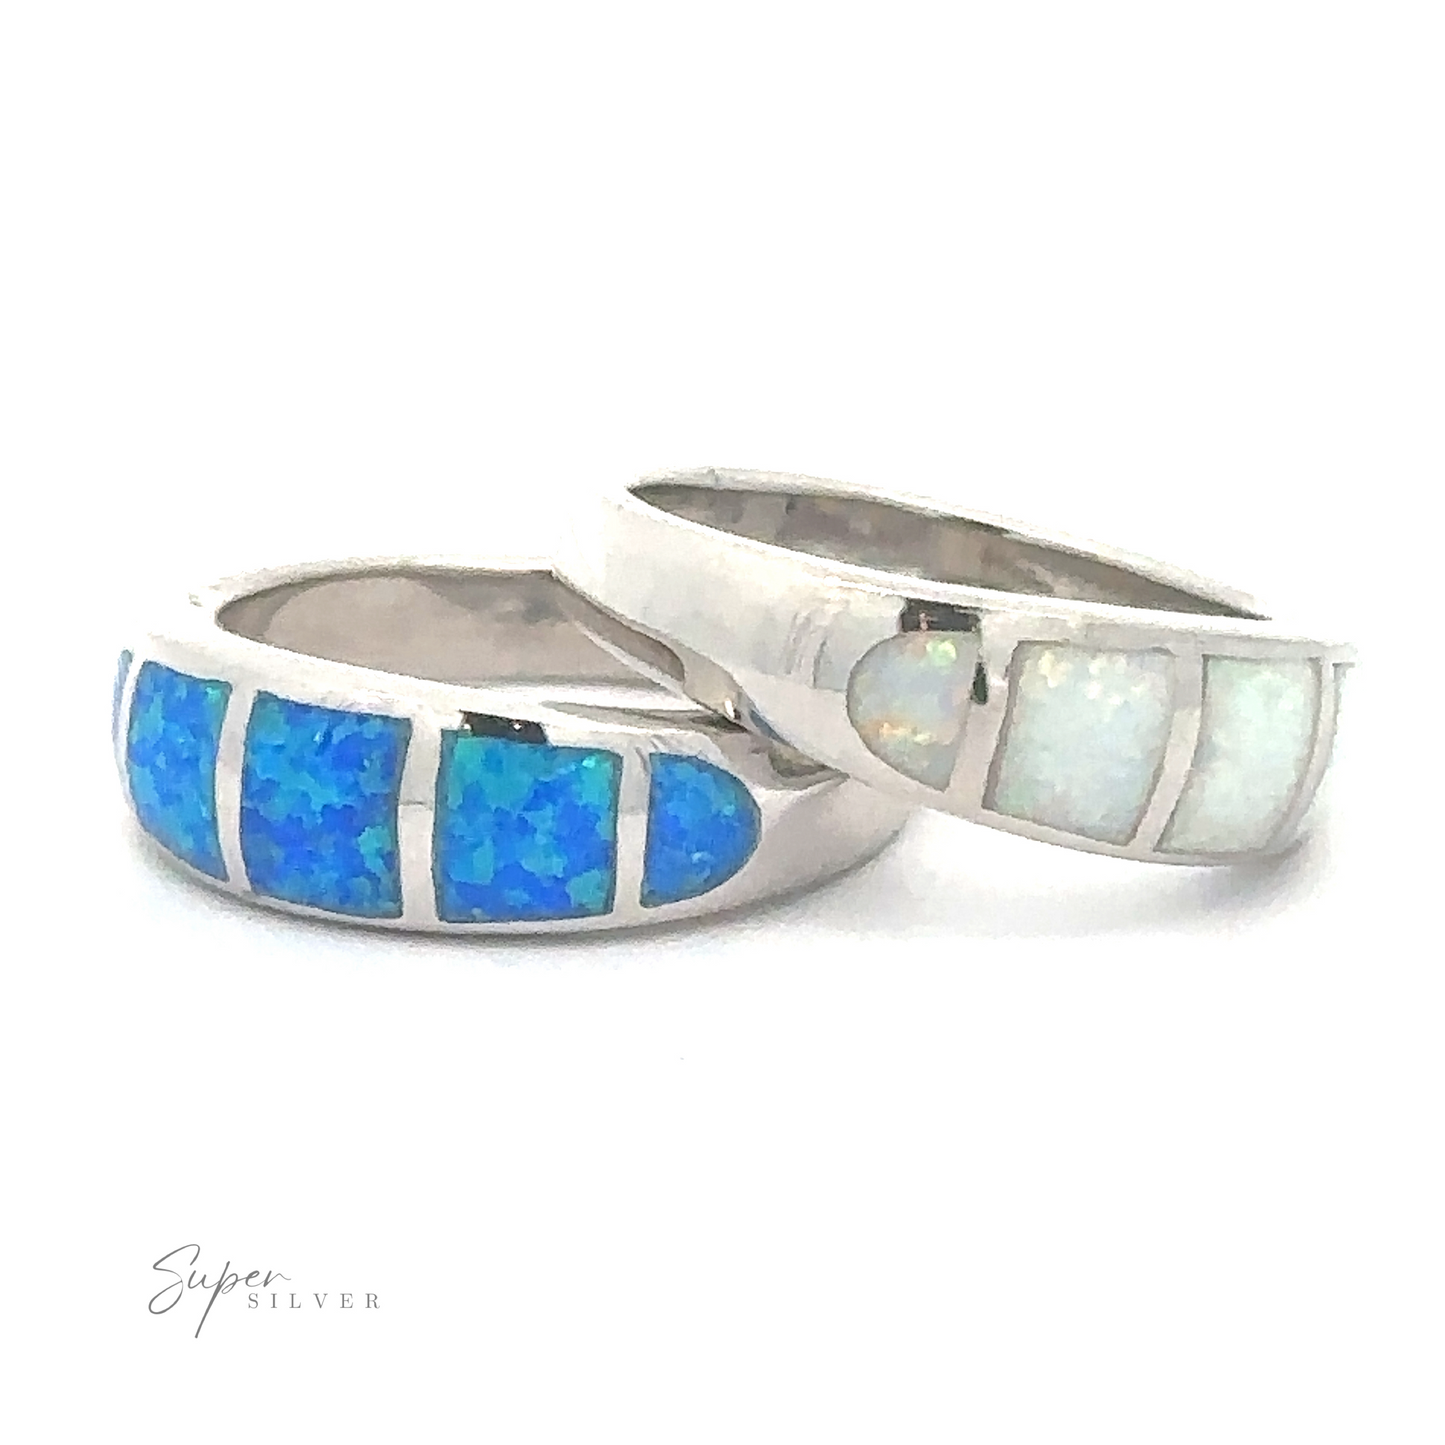 Two lightweight Tapered Lab-Opal Bands with inlaid blue and white gemstones, durable and versatile for everyday wear.